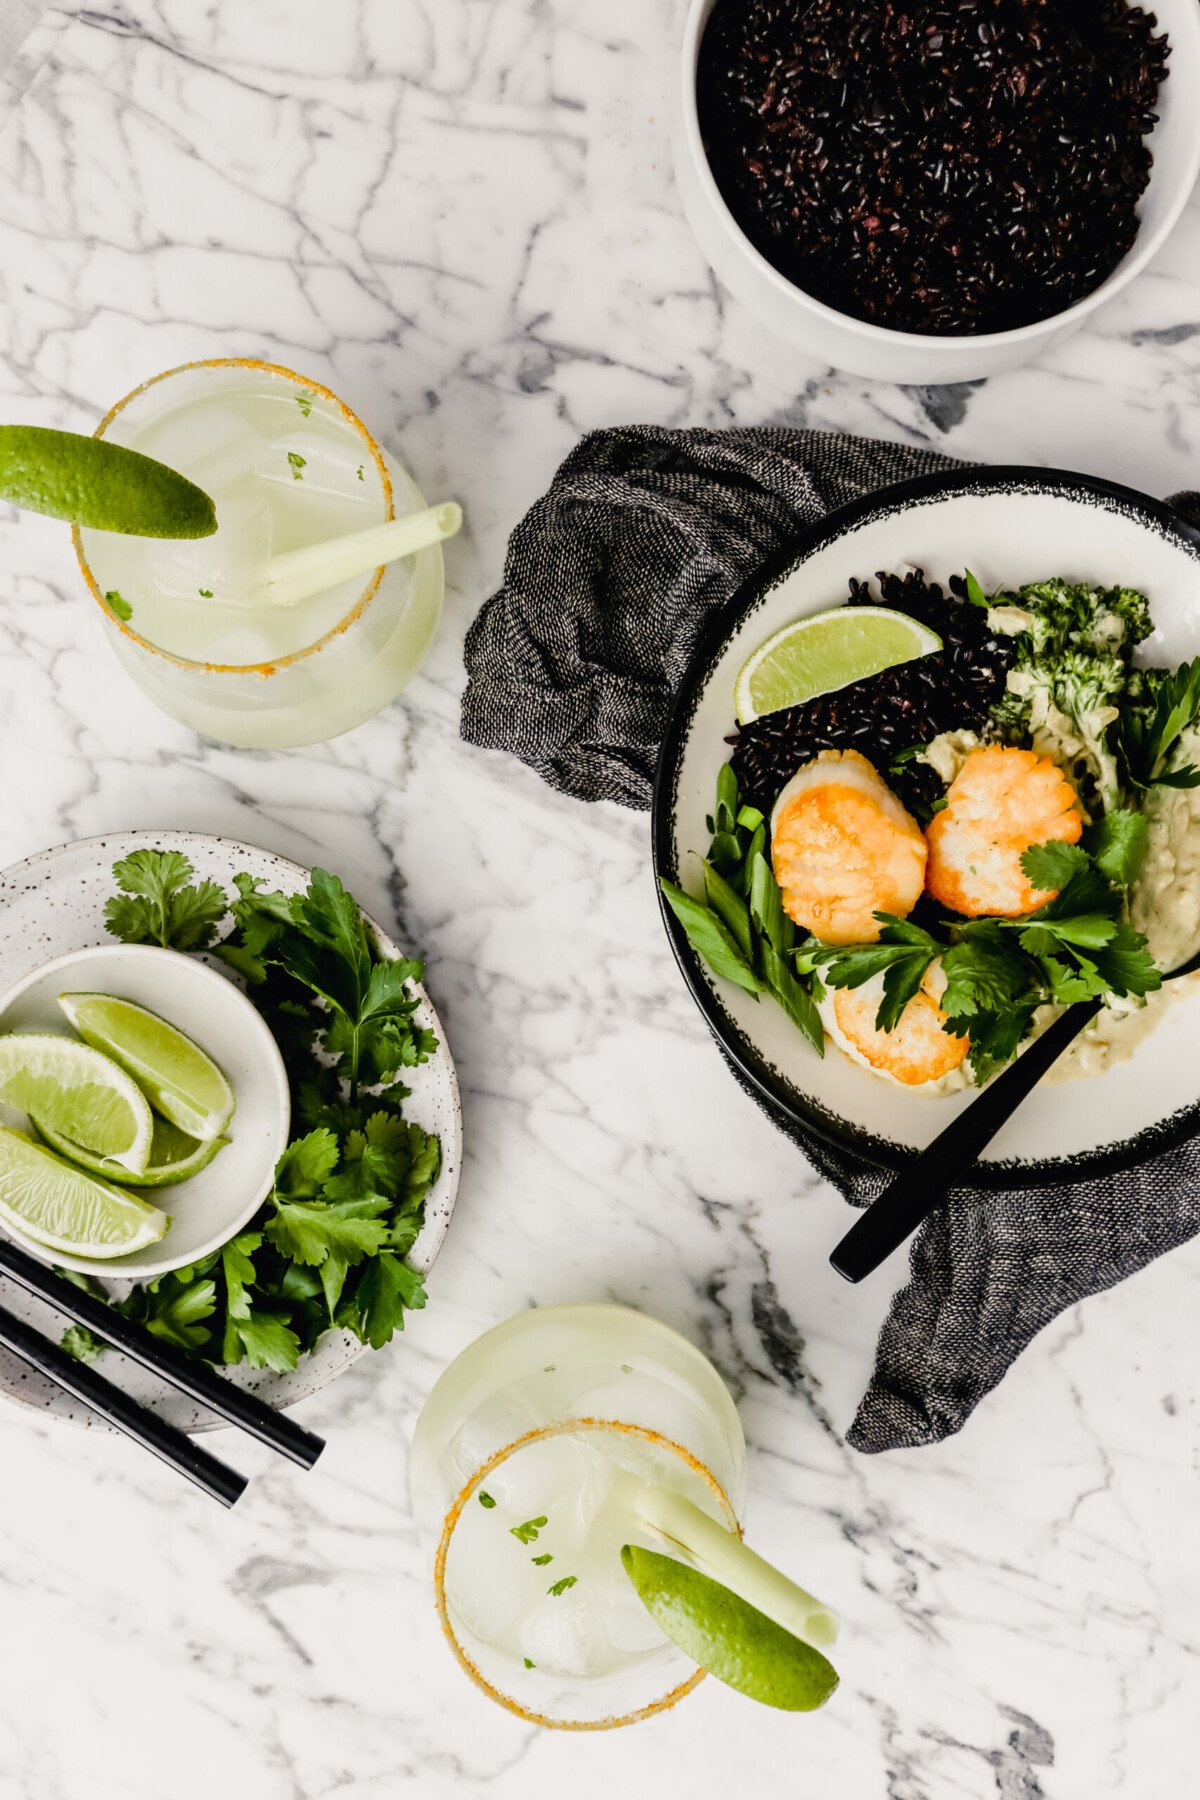 Photograph of a bowl filled with green coconut curry, black rice, broccolini and golden scallops set on a marble table with a gray napkin.